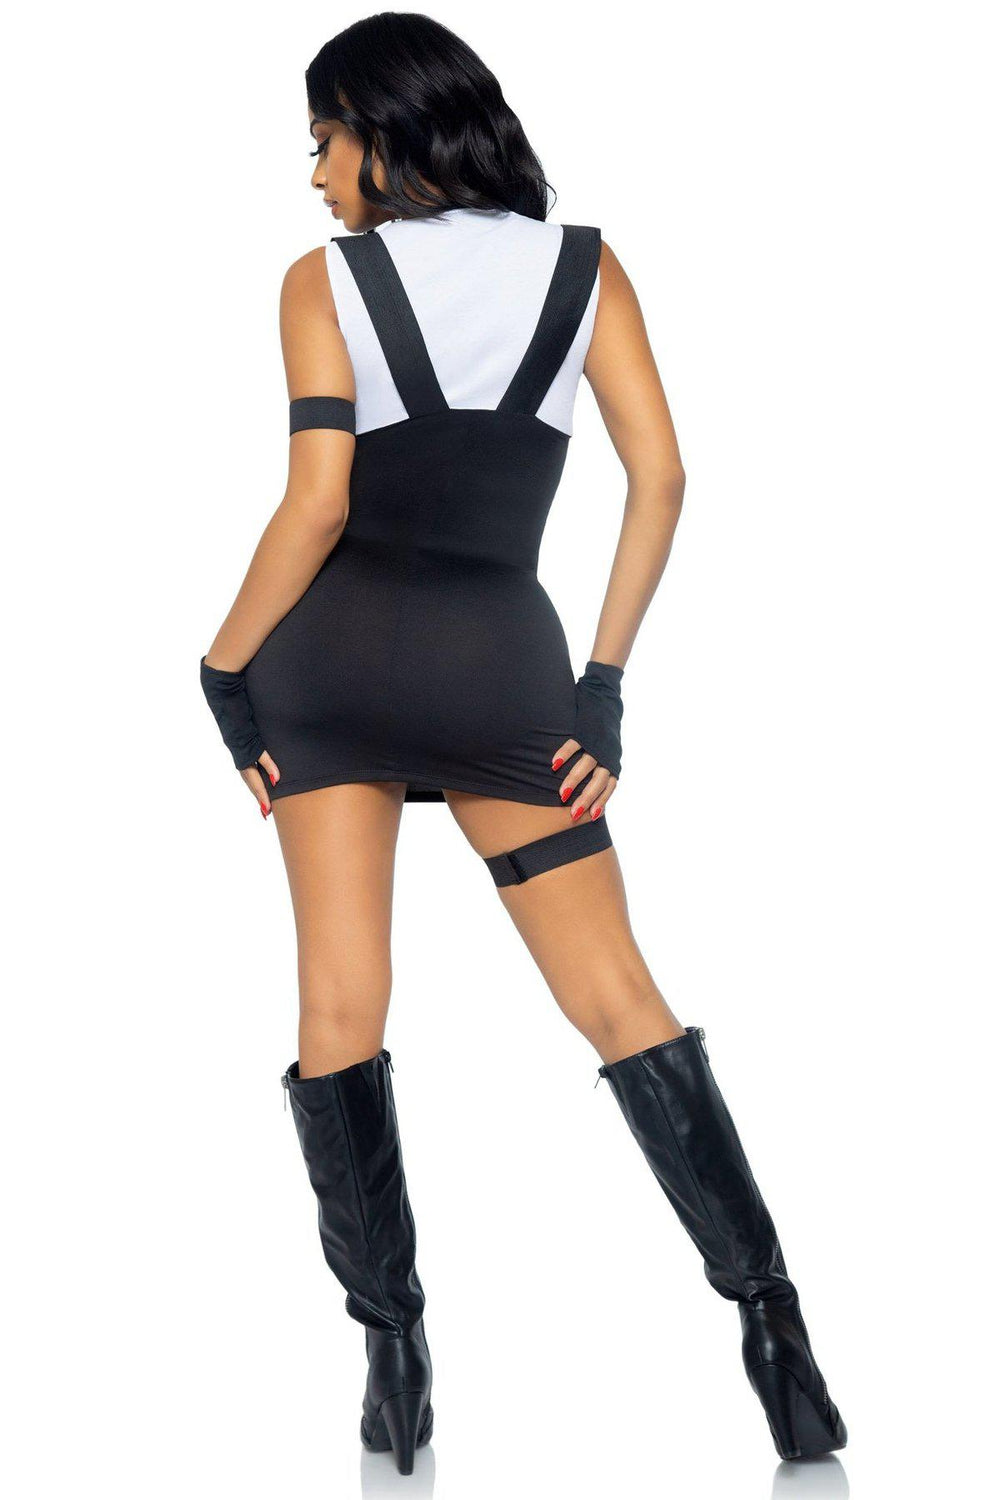 Sultry SWAT Costume-Cop Costumes-Leg Avenue-SEXYSHOES.COM